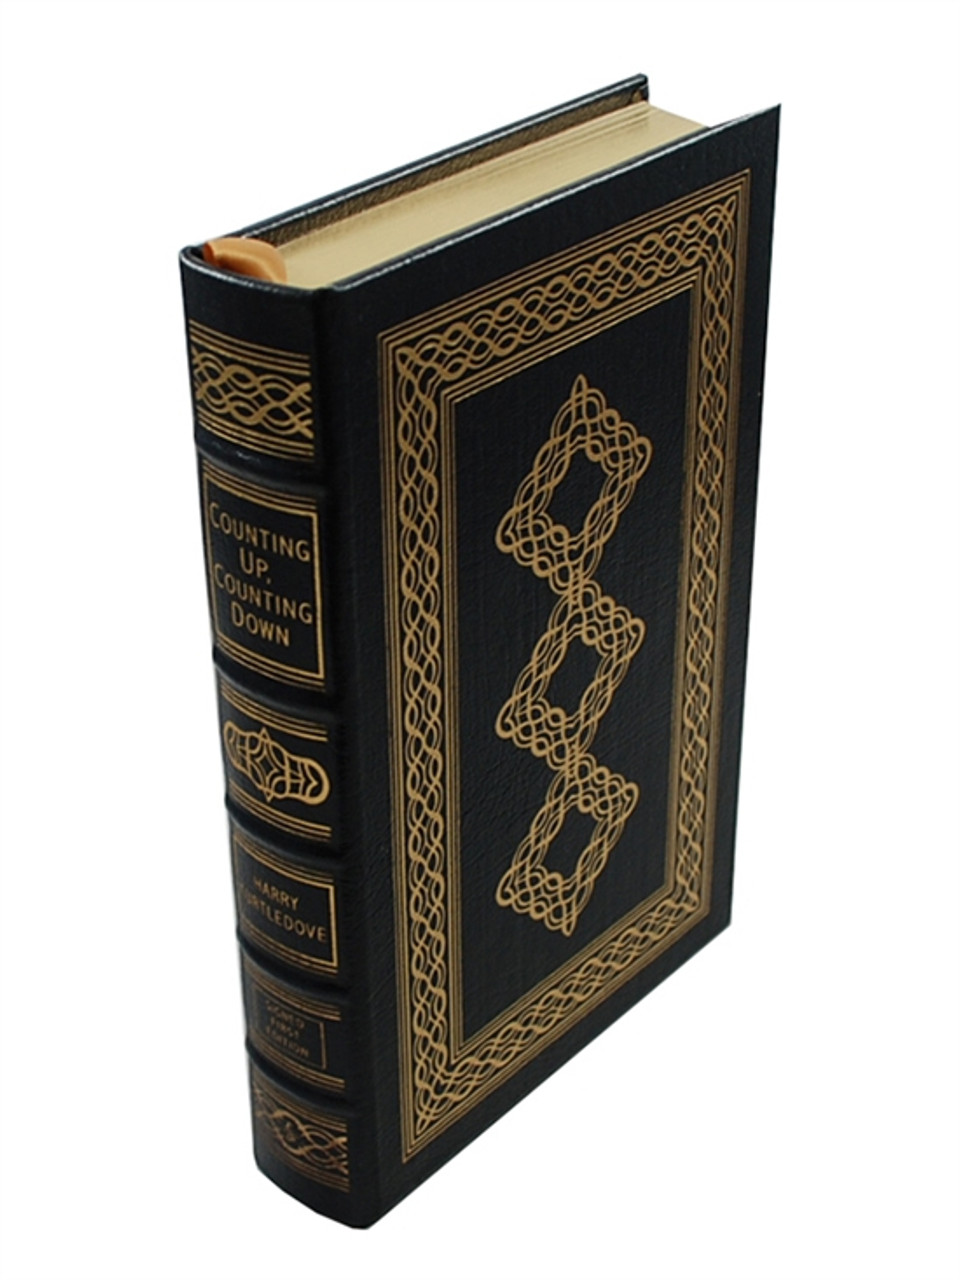 Easton Press "Counting Up, Counting Down" Harry Turtledove, Signed First Edition, Leather Bound [Very Fine]